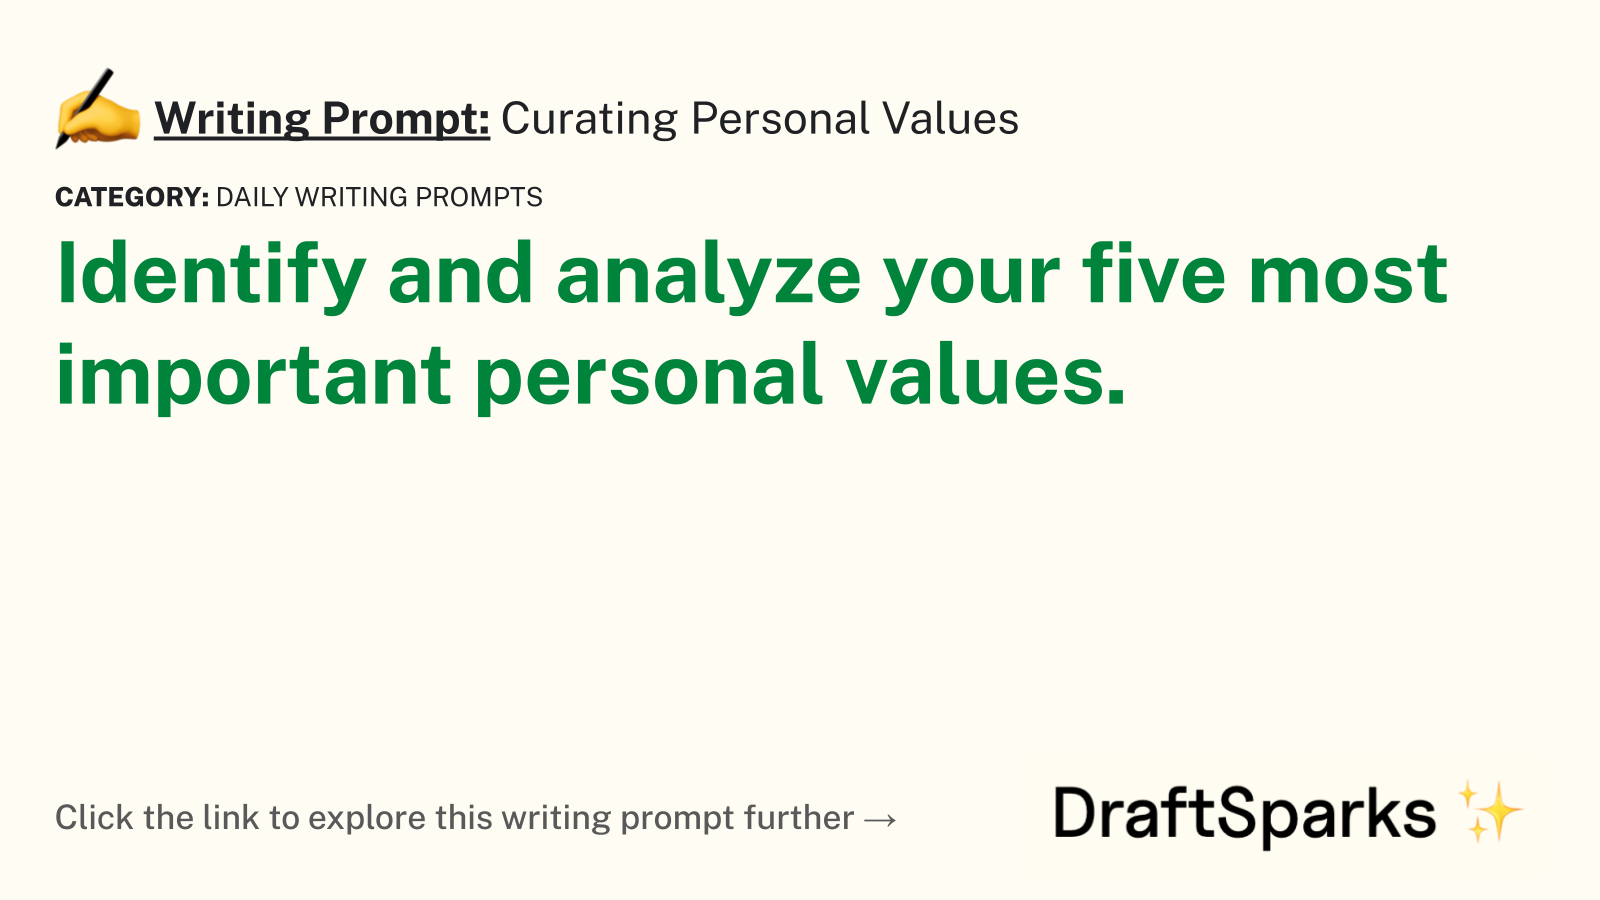 Curating Personal Values